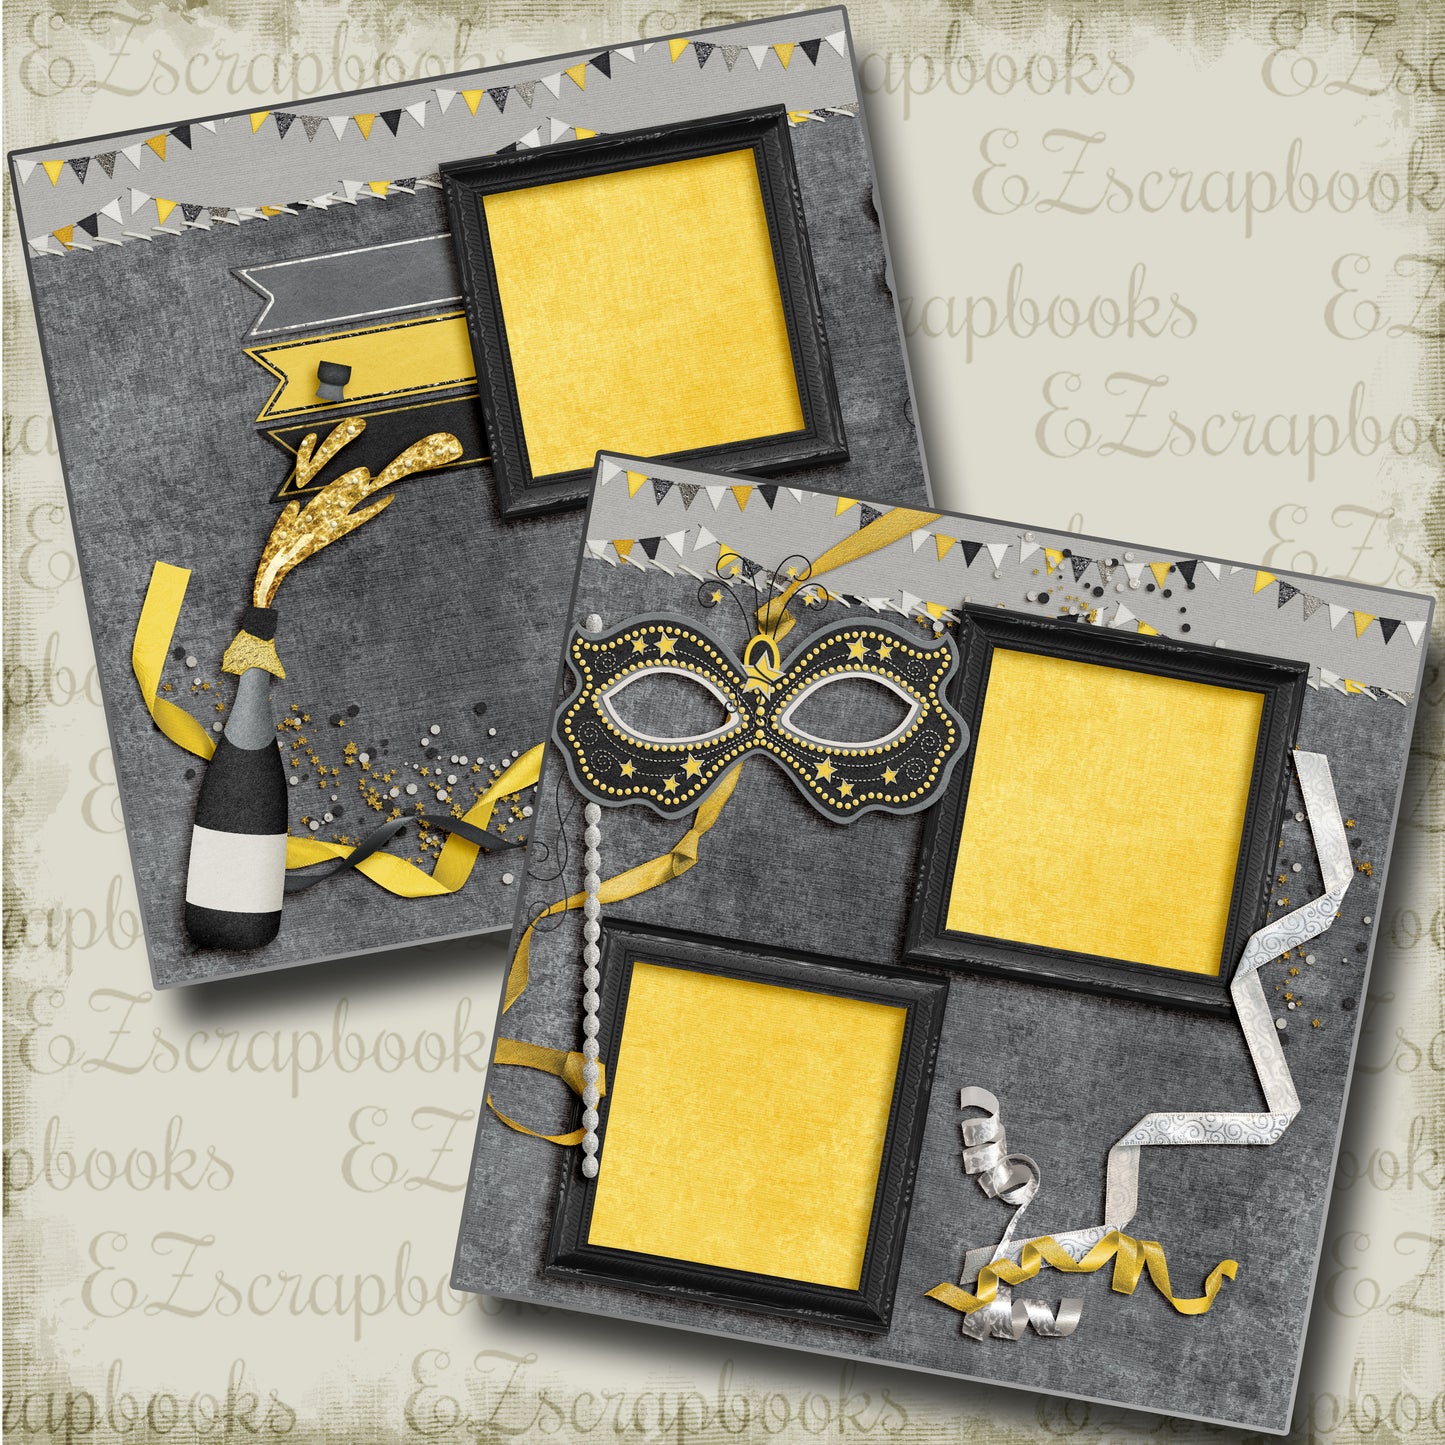 New Year's Party - 4452 - EZscrapbooks Scrapbook Layouts New Year's